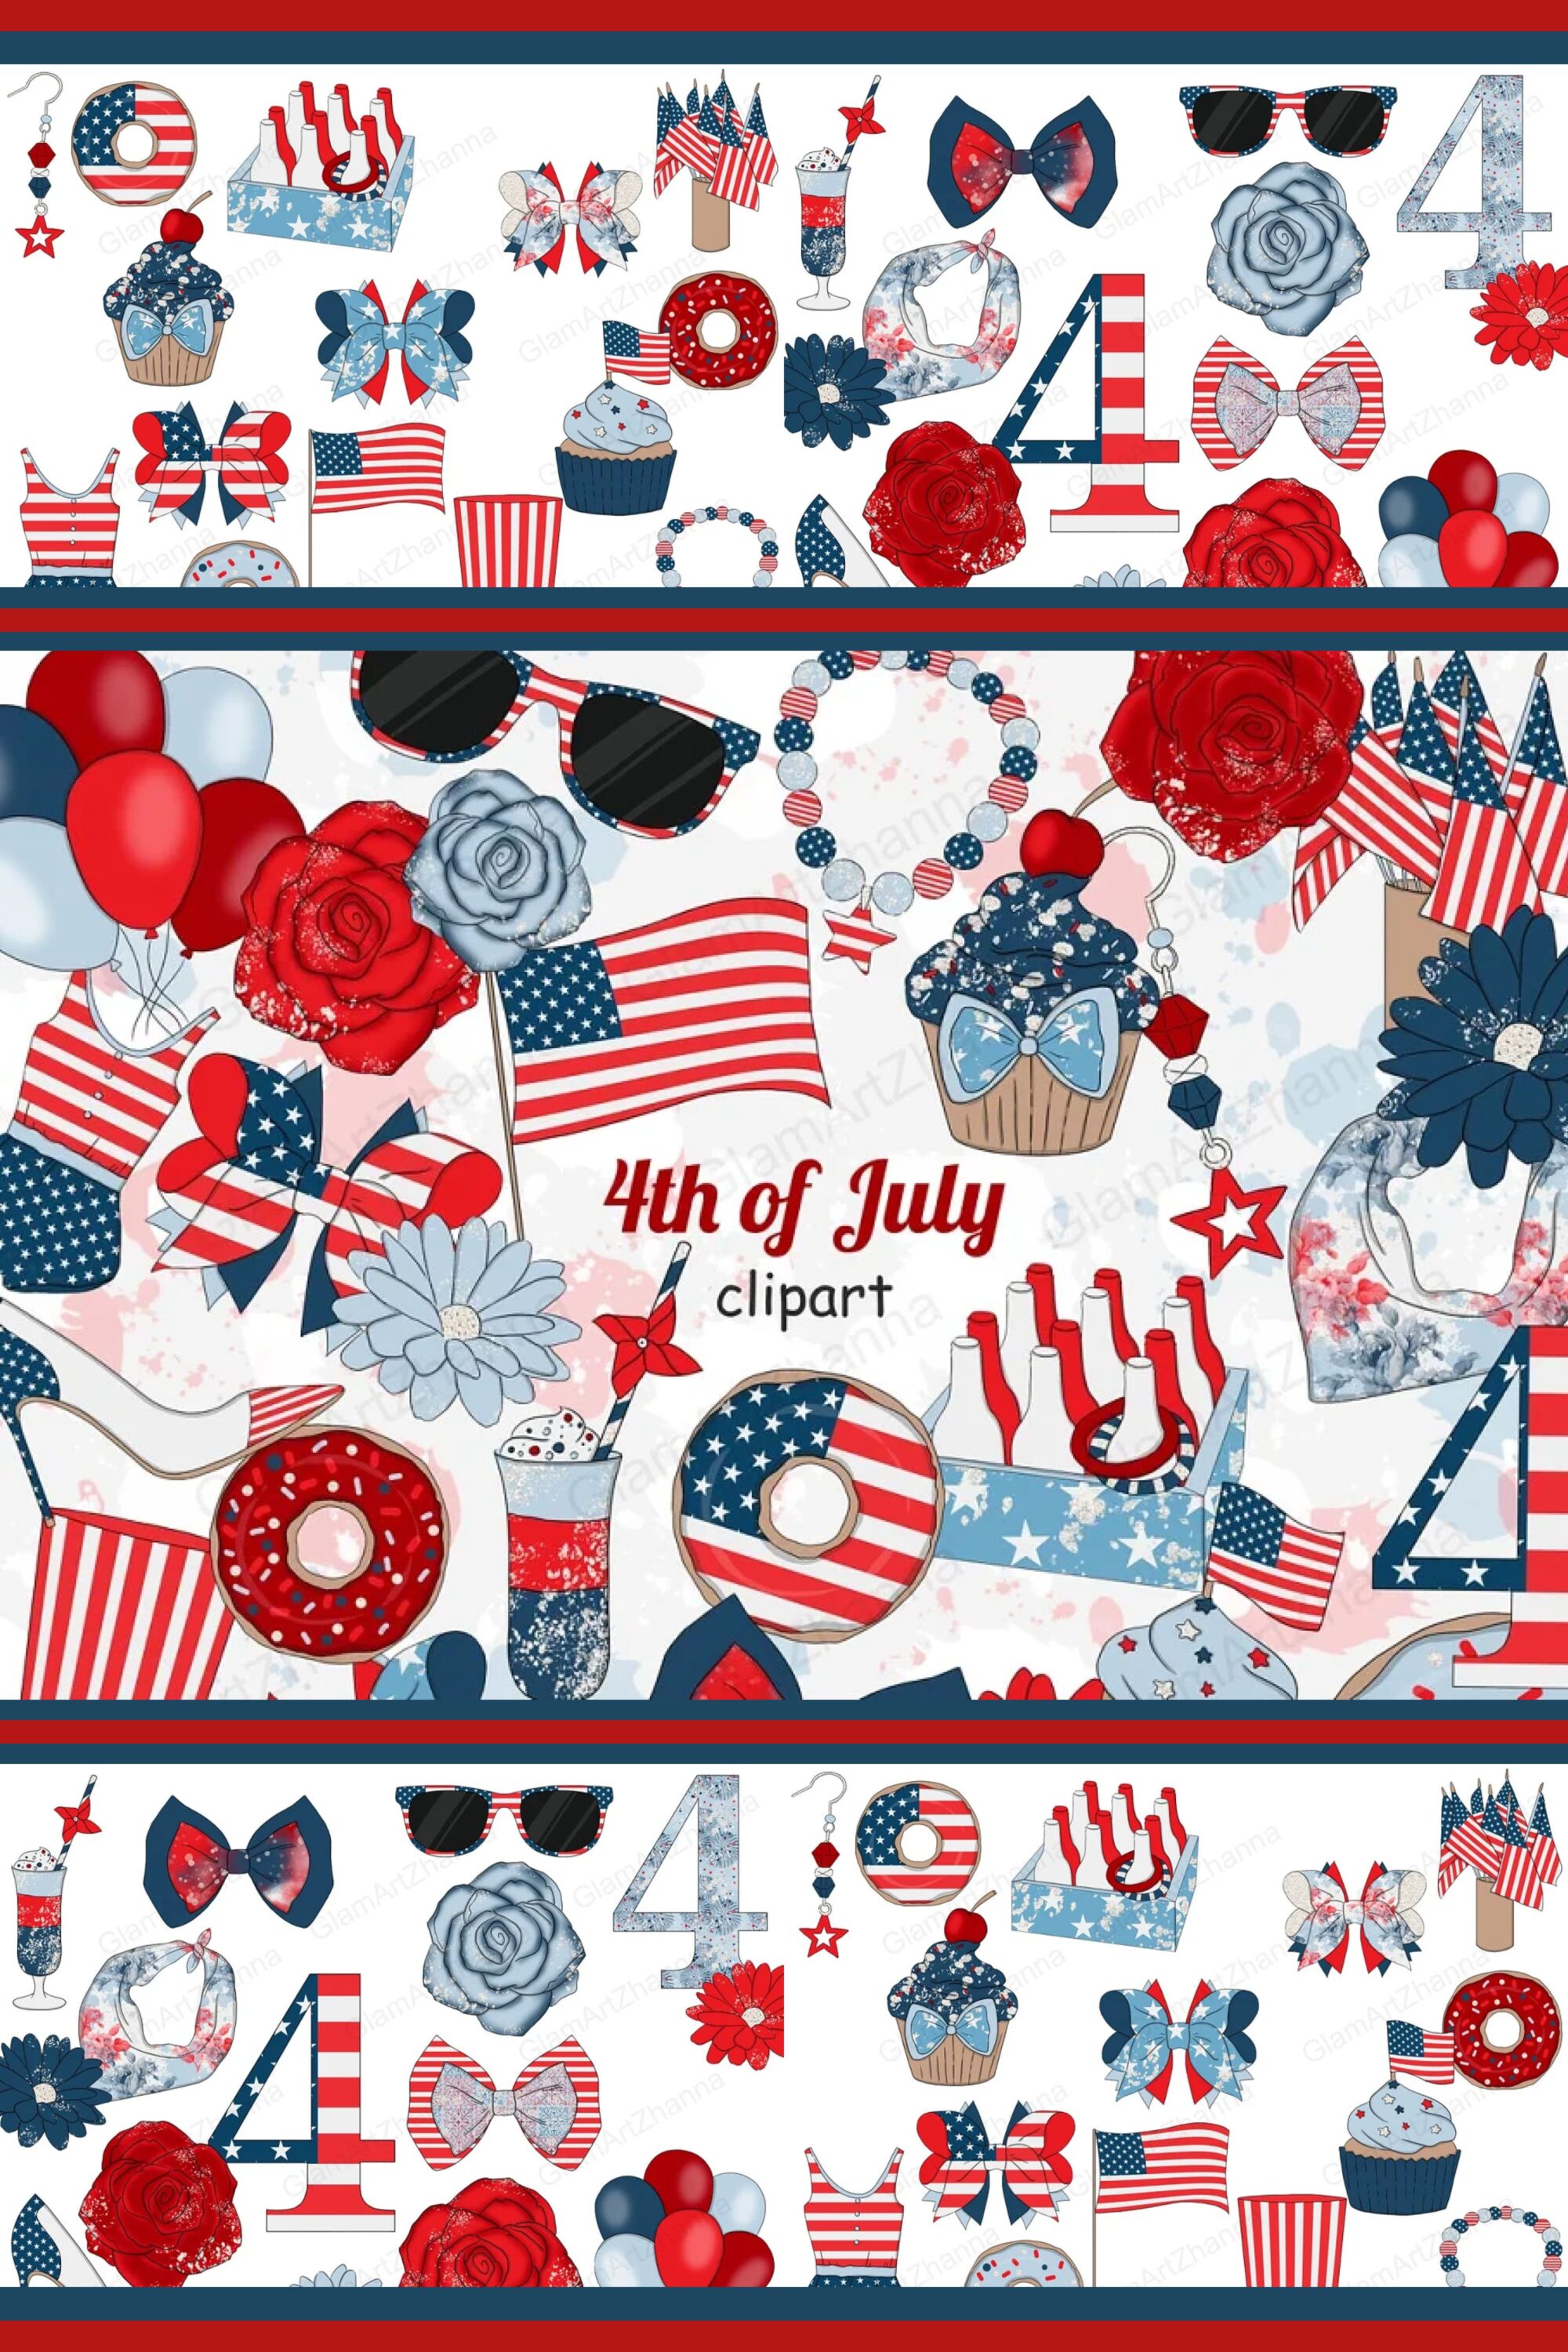 4th of July Clipart pinterest image.